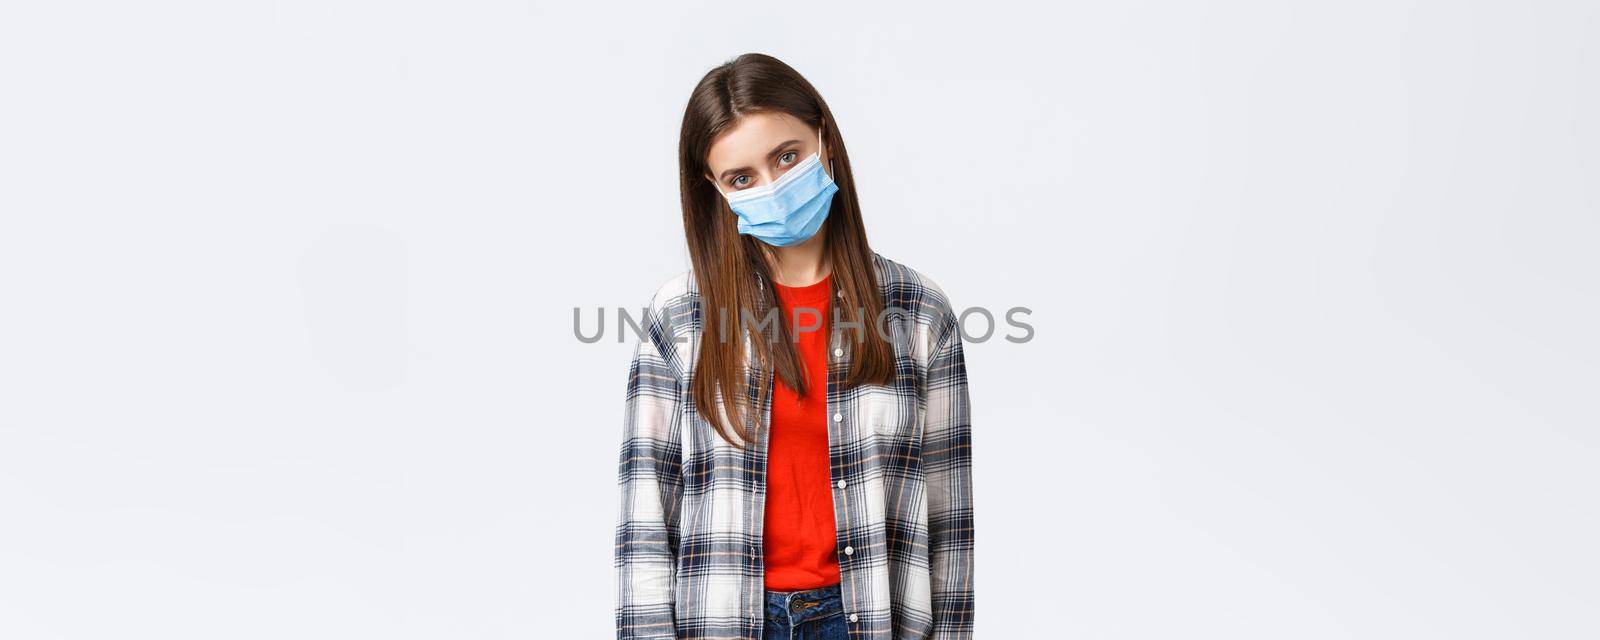 Coronavirus outbreak, leisure on quarantine, social distancing and emotions concept. Tired and bored young woman in medical mask complaining staying home self-isolation, want party and have fun by Benzoix